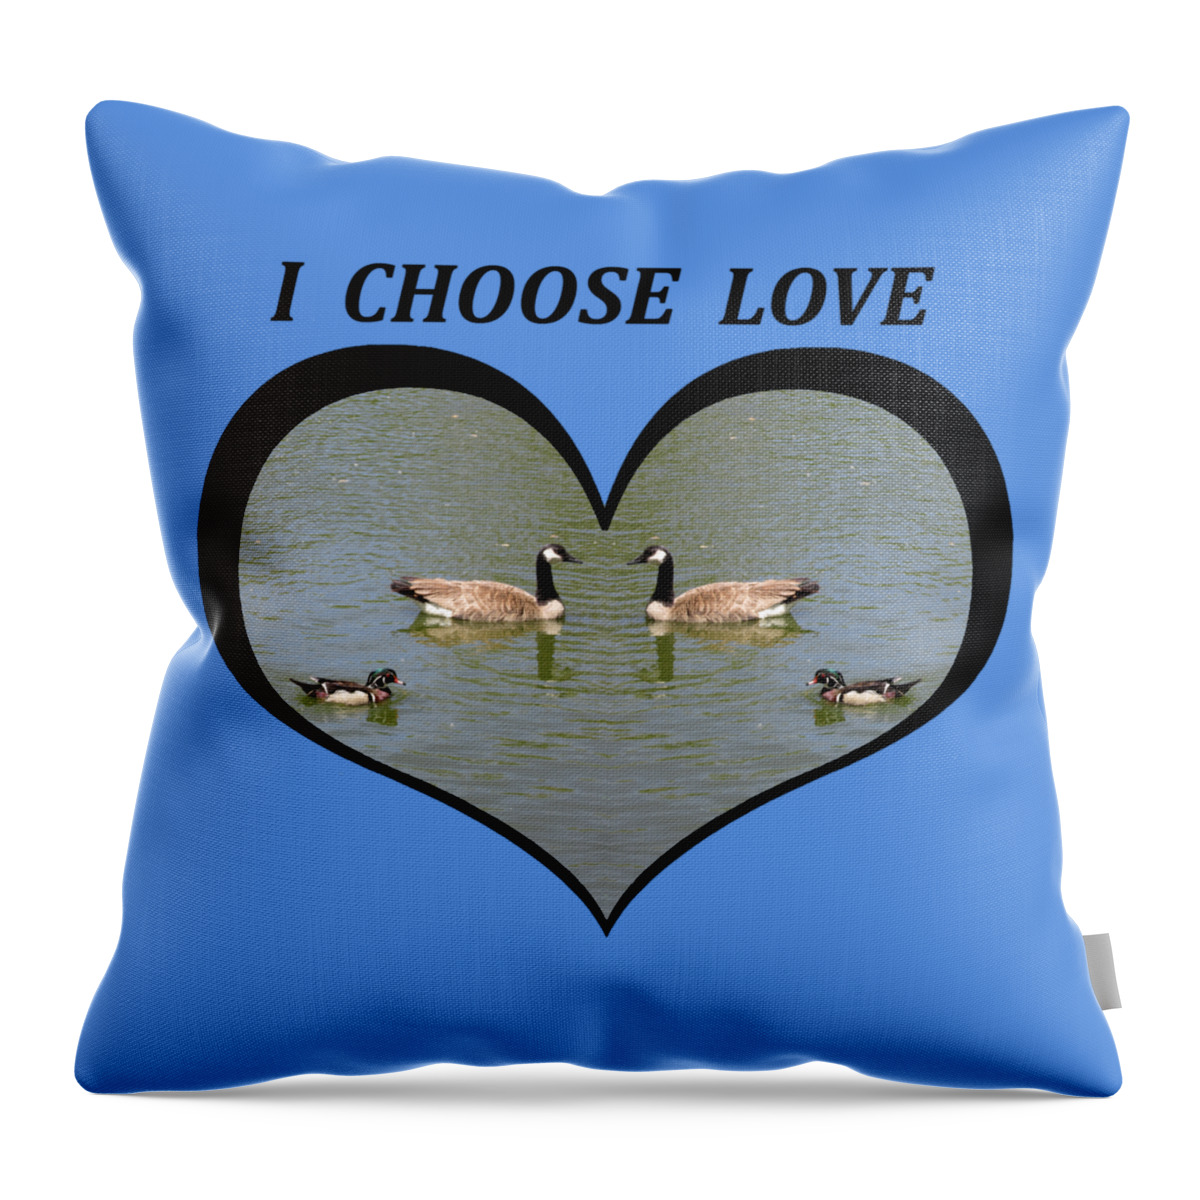 Love Throw Pillow featuring the digital art I Choose Love with a Spoonbill Duck and Geese on a pond in a Heart by Julia L Wright